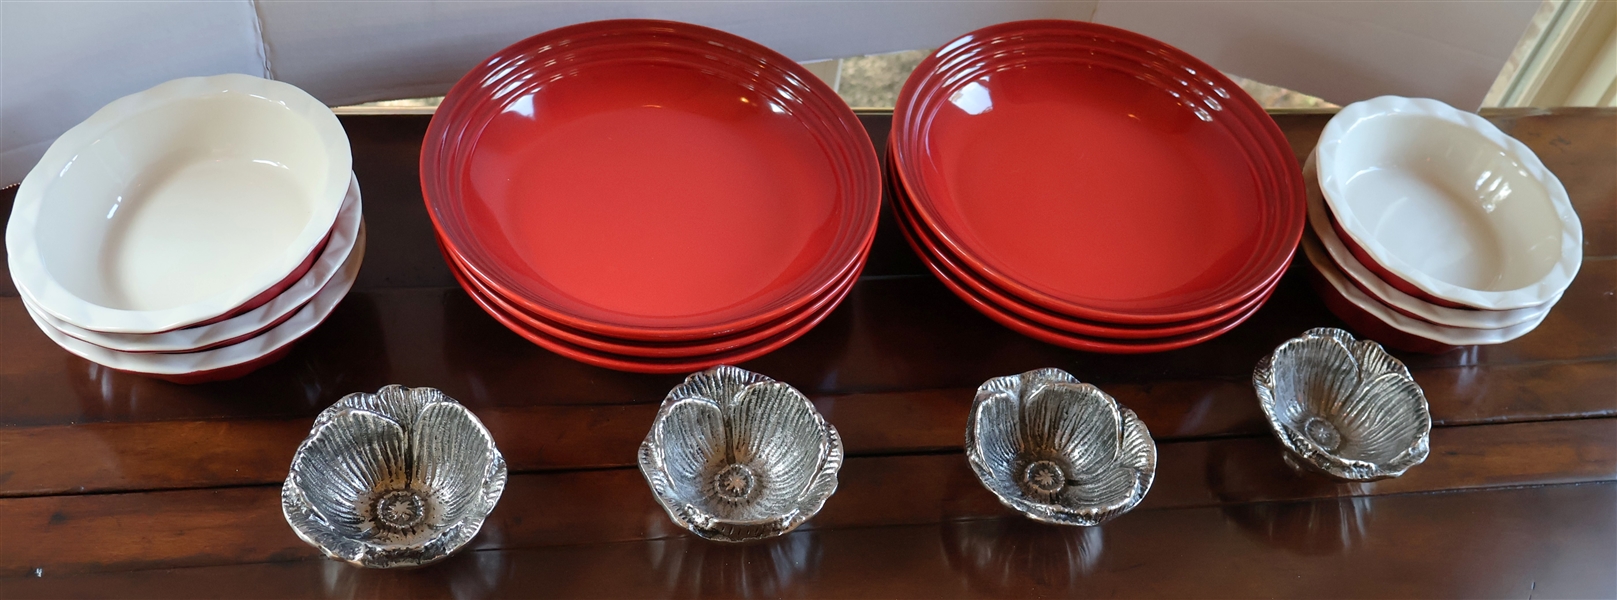 6 - Red Le Creuset Pasta Bowls - Measuring 10" Across, 6 - Good Cook 5 1/2" Bowls, and 4 Pewter Flower Bowls Measuring 4" Across - 2 Le Creuset Bows are Minor Damage